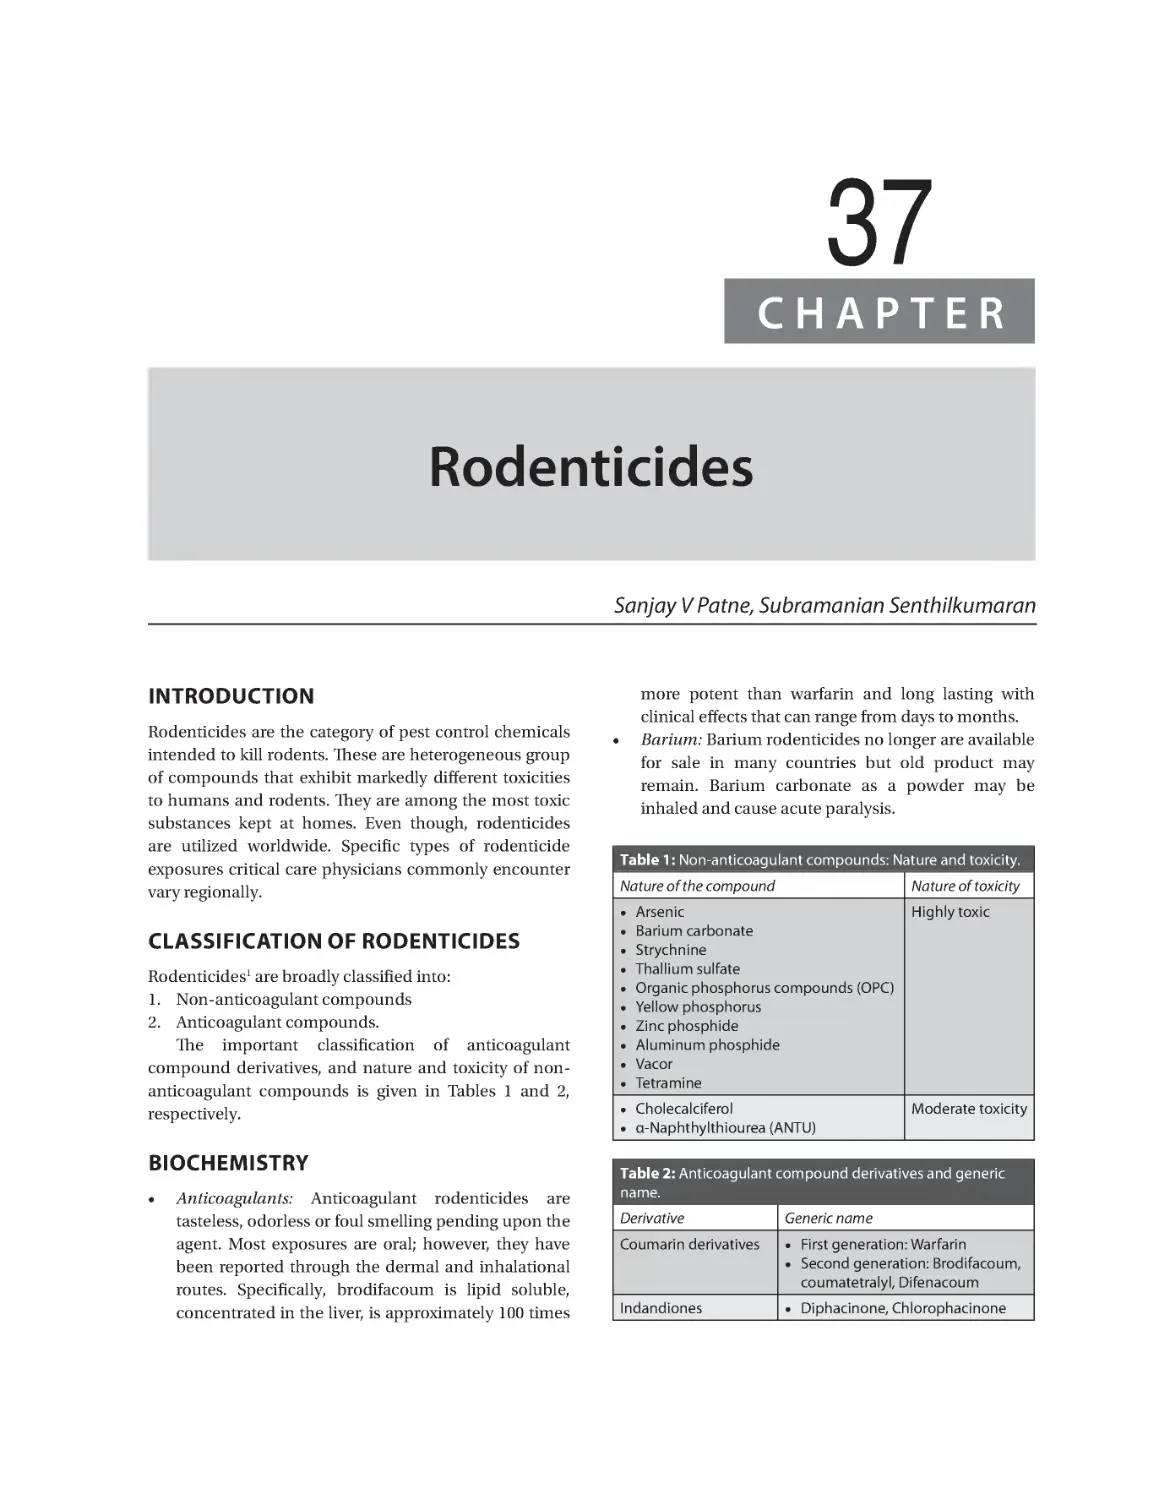 Chapter 37: Rodenticides